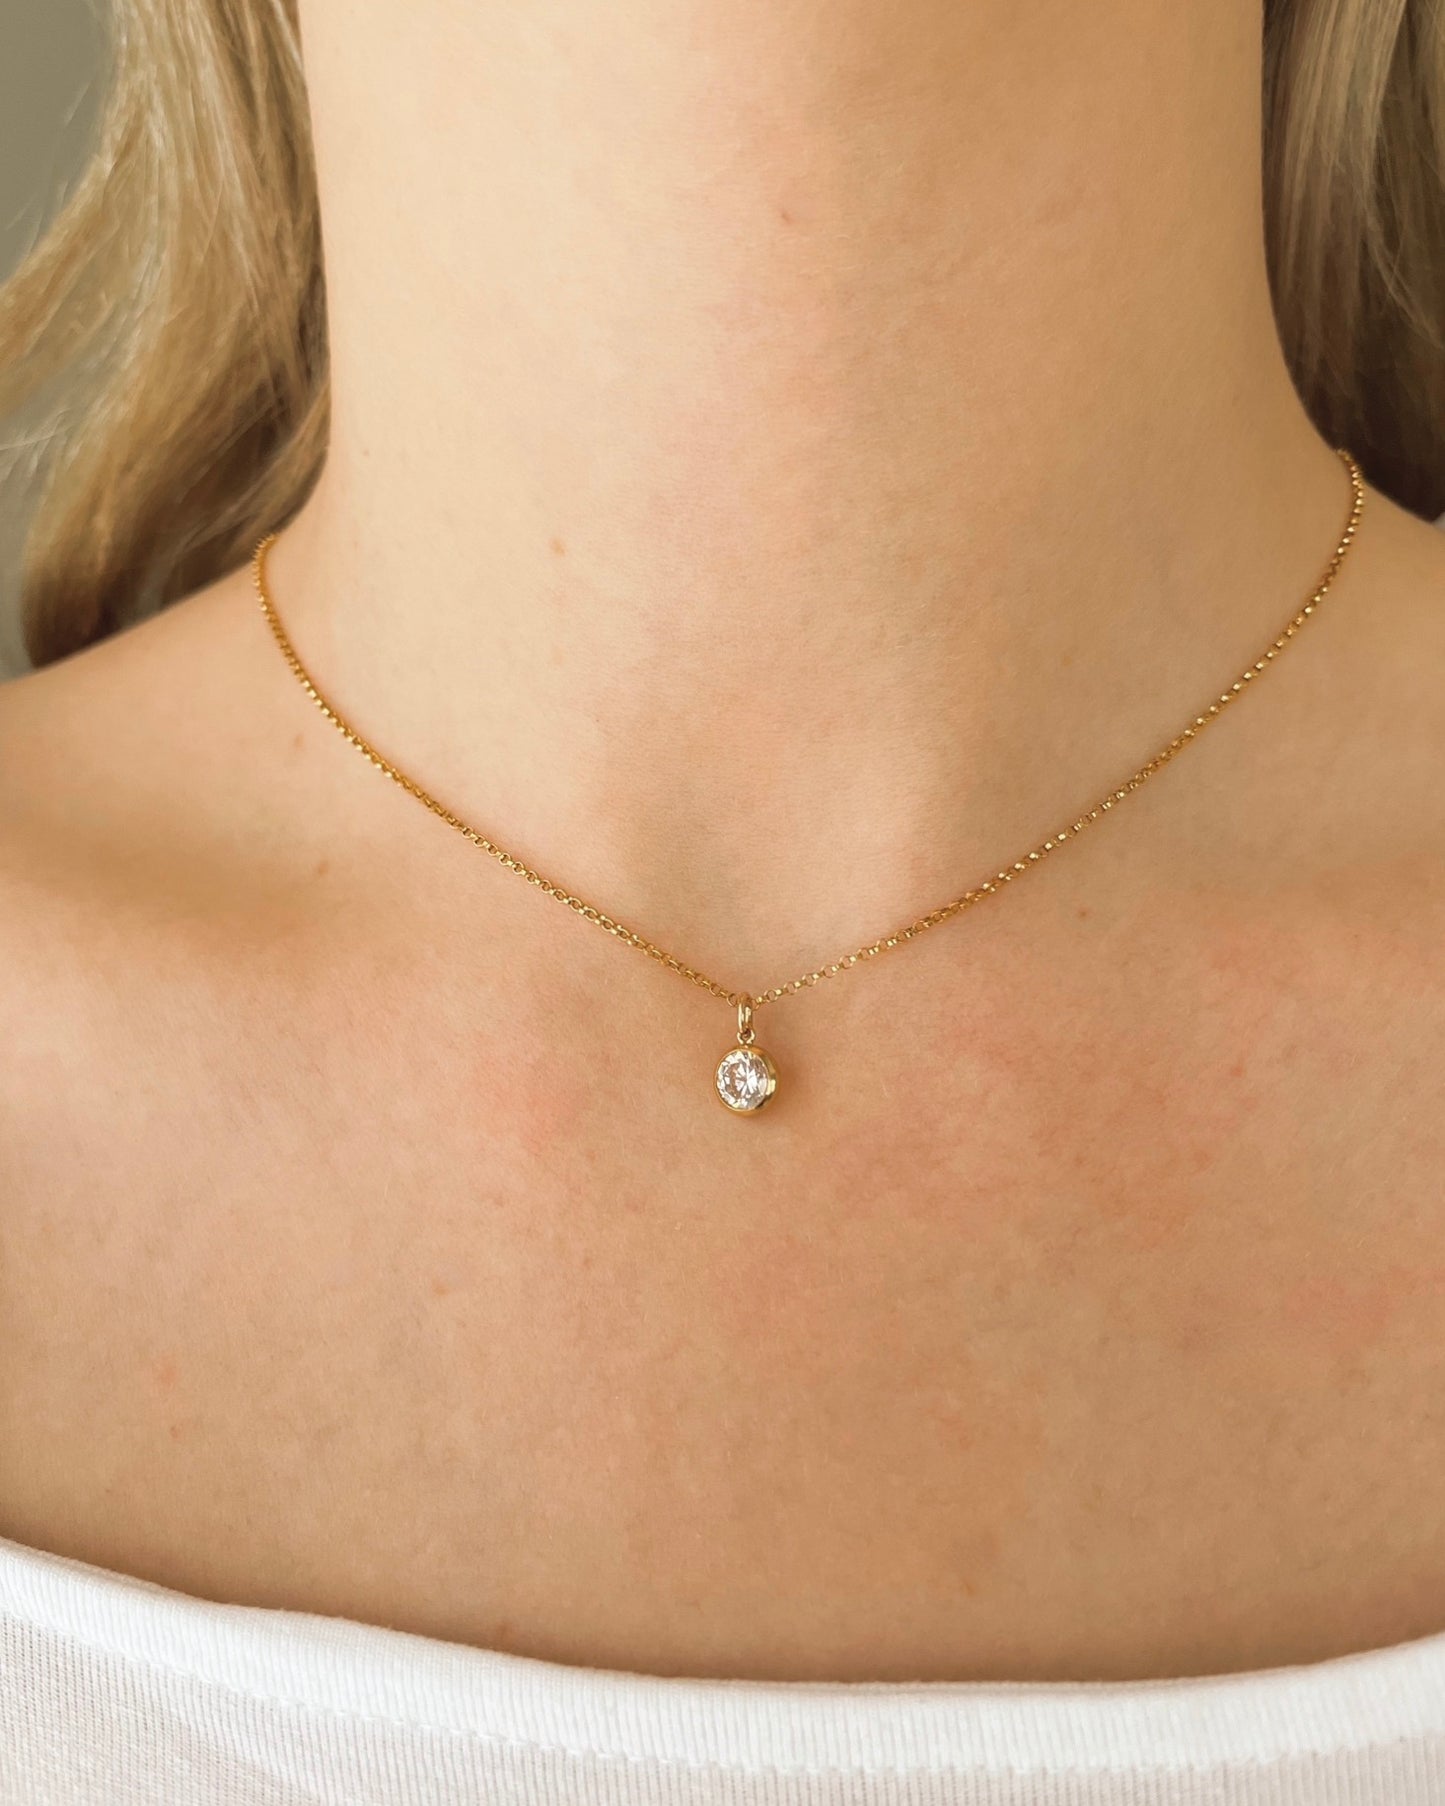 Dainty Clear Sparkly Charm Necklace